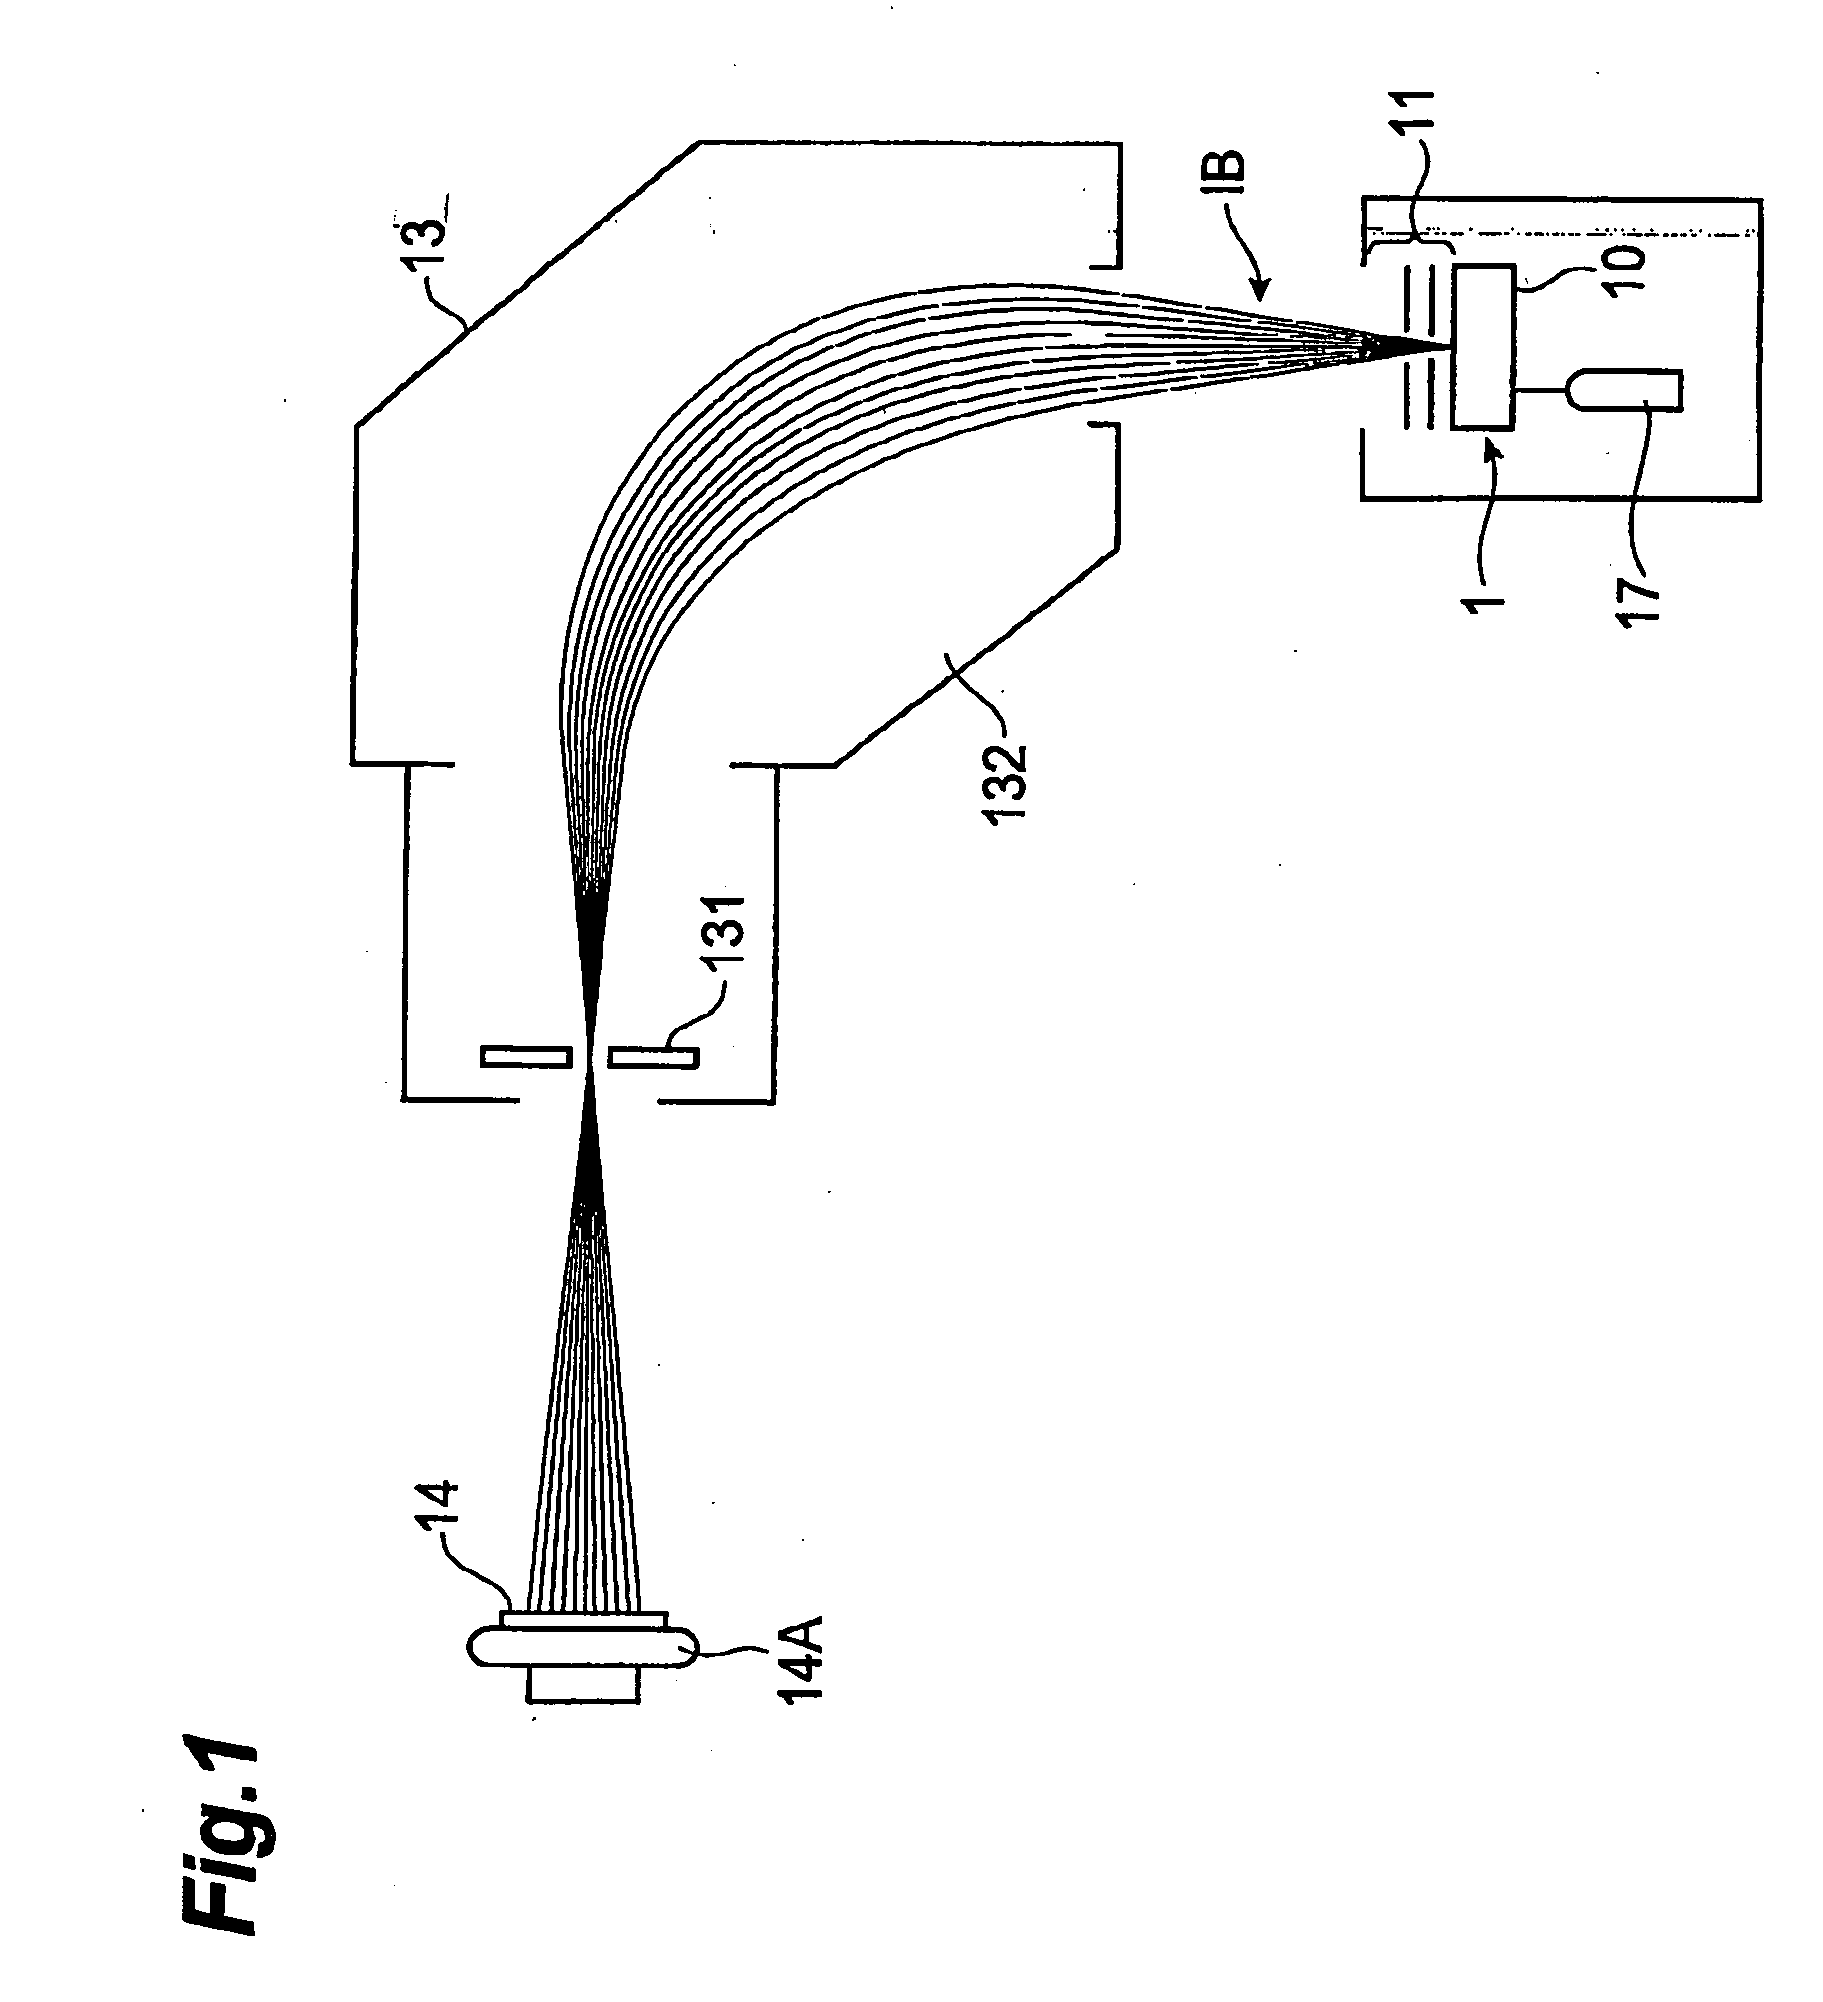 Ion implantation method and method for manufacturing SOI wafer